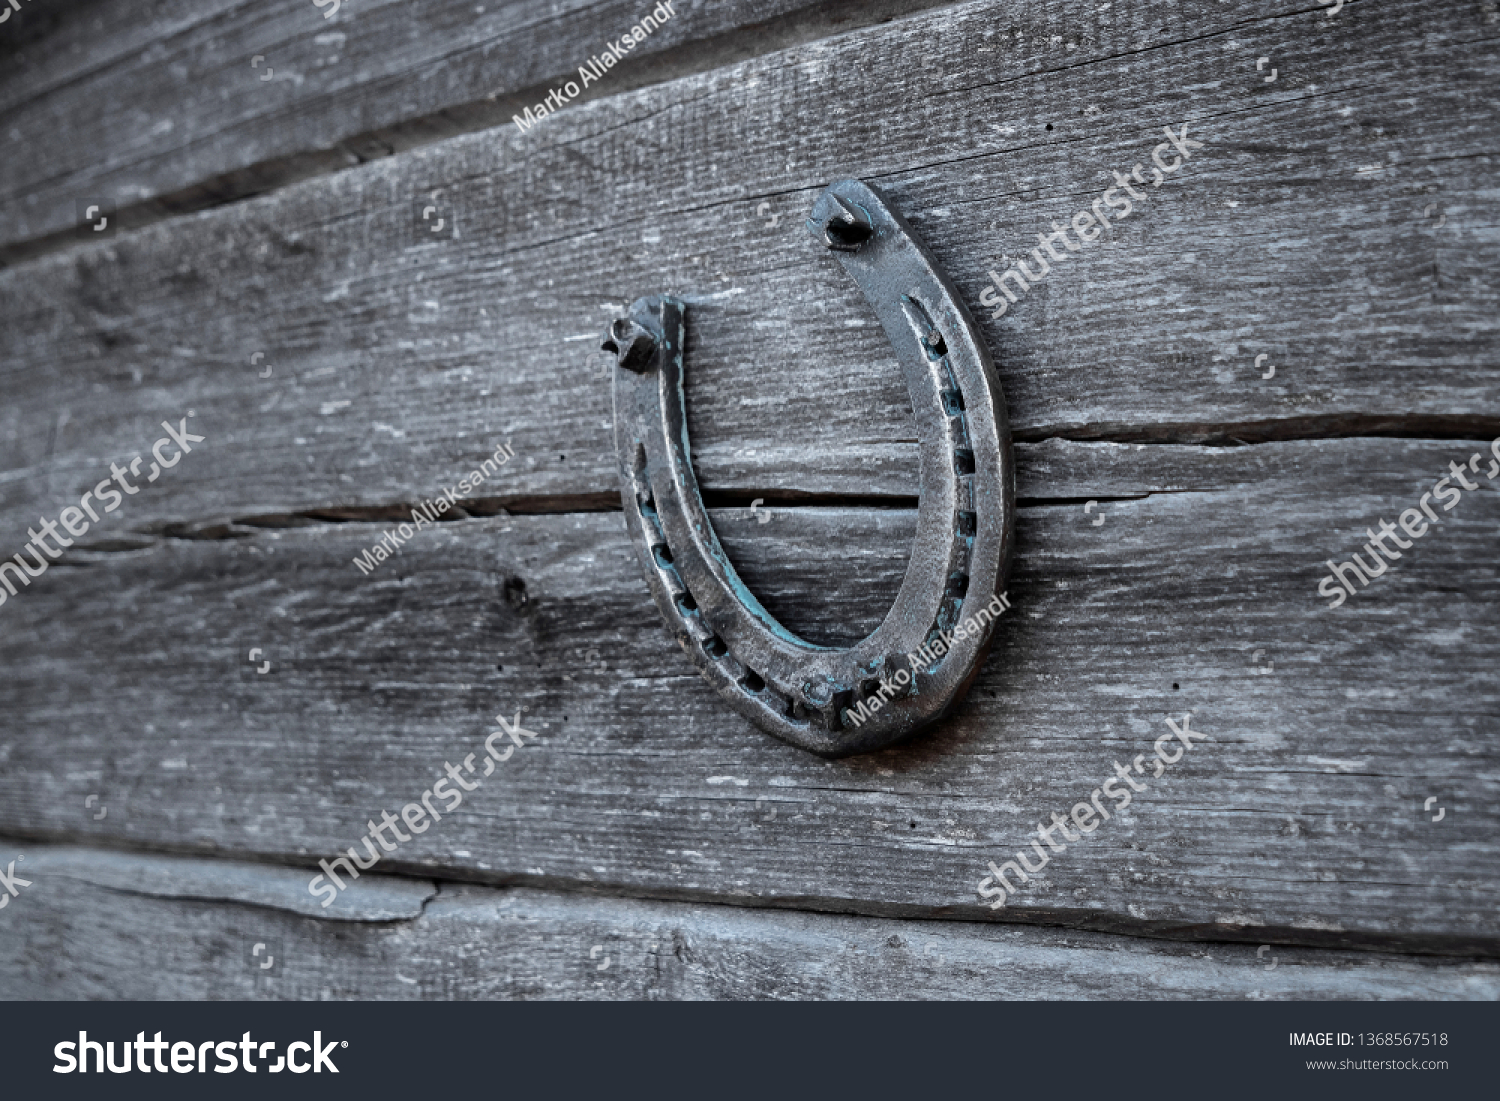 Old horseshoe on an old wooden board. The concept of luck, luck, luck. #1368567518